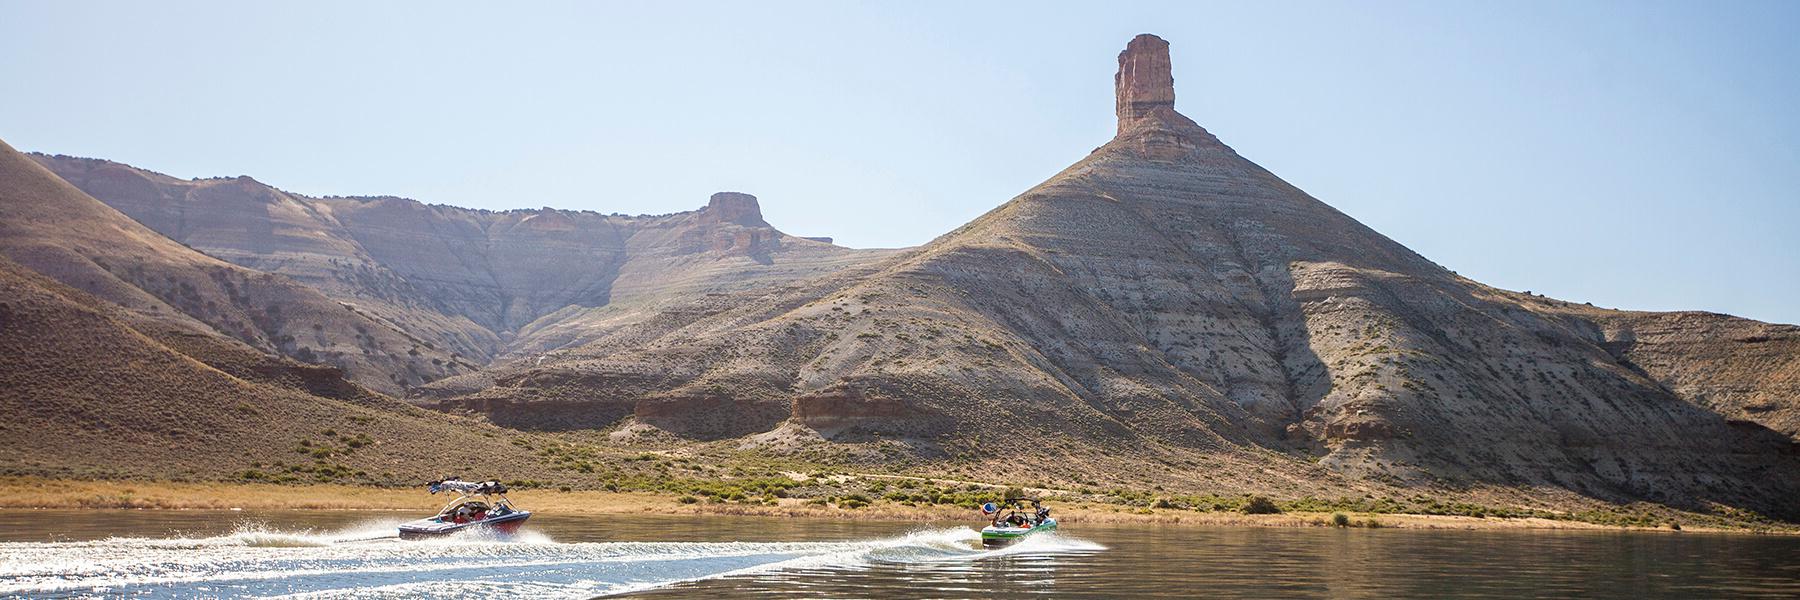 Boating in Flaming Gorge National Recreation Area